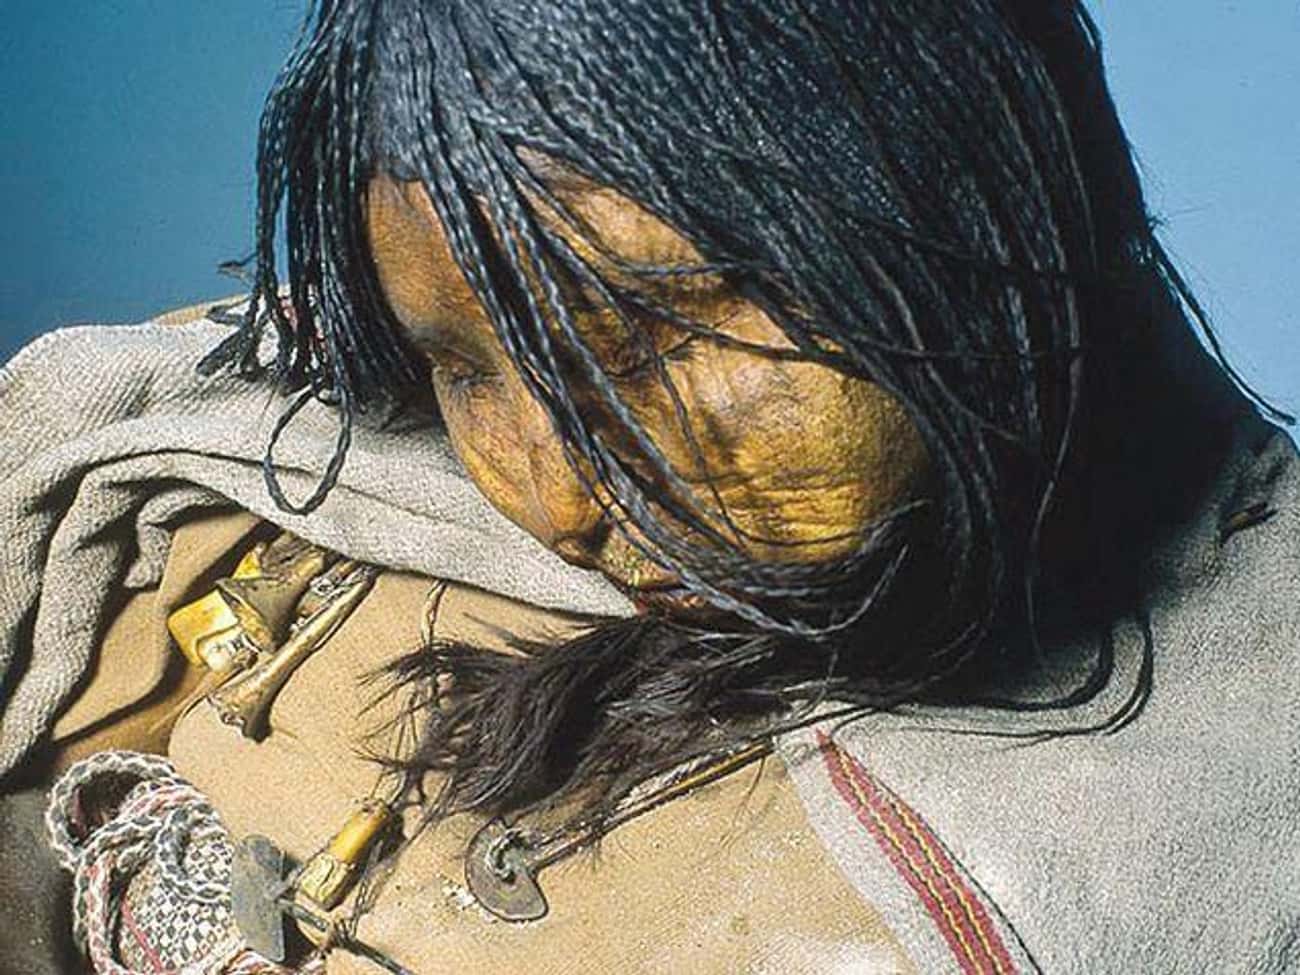 Using Hair, Researchers Gained A Wealth Of Information About The Mummies&#39; Former Lives